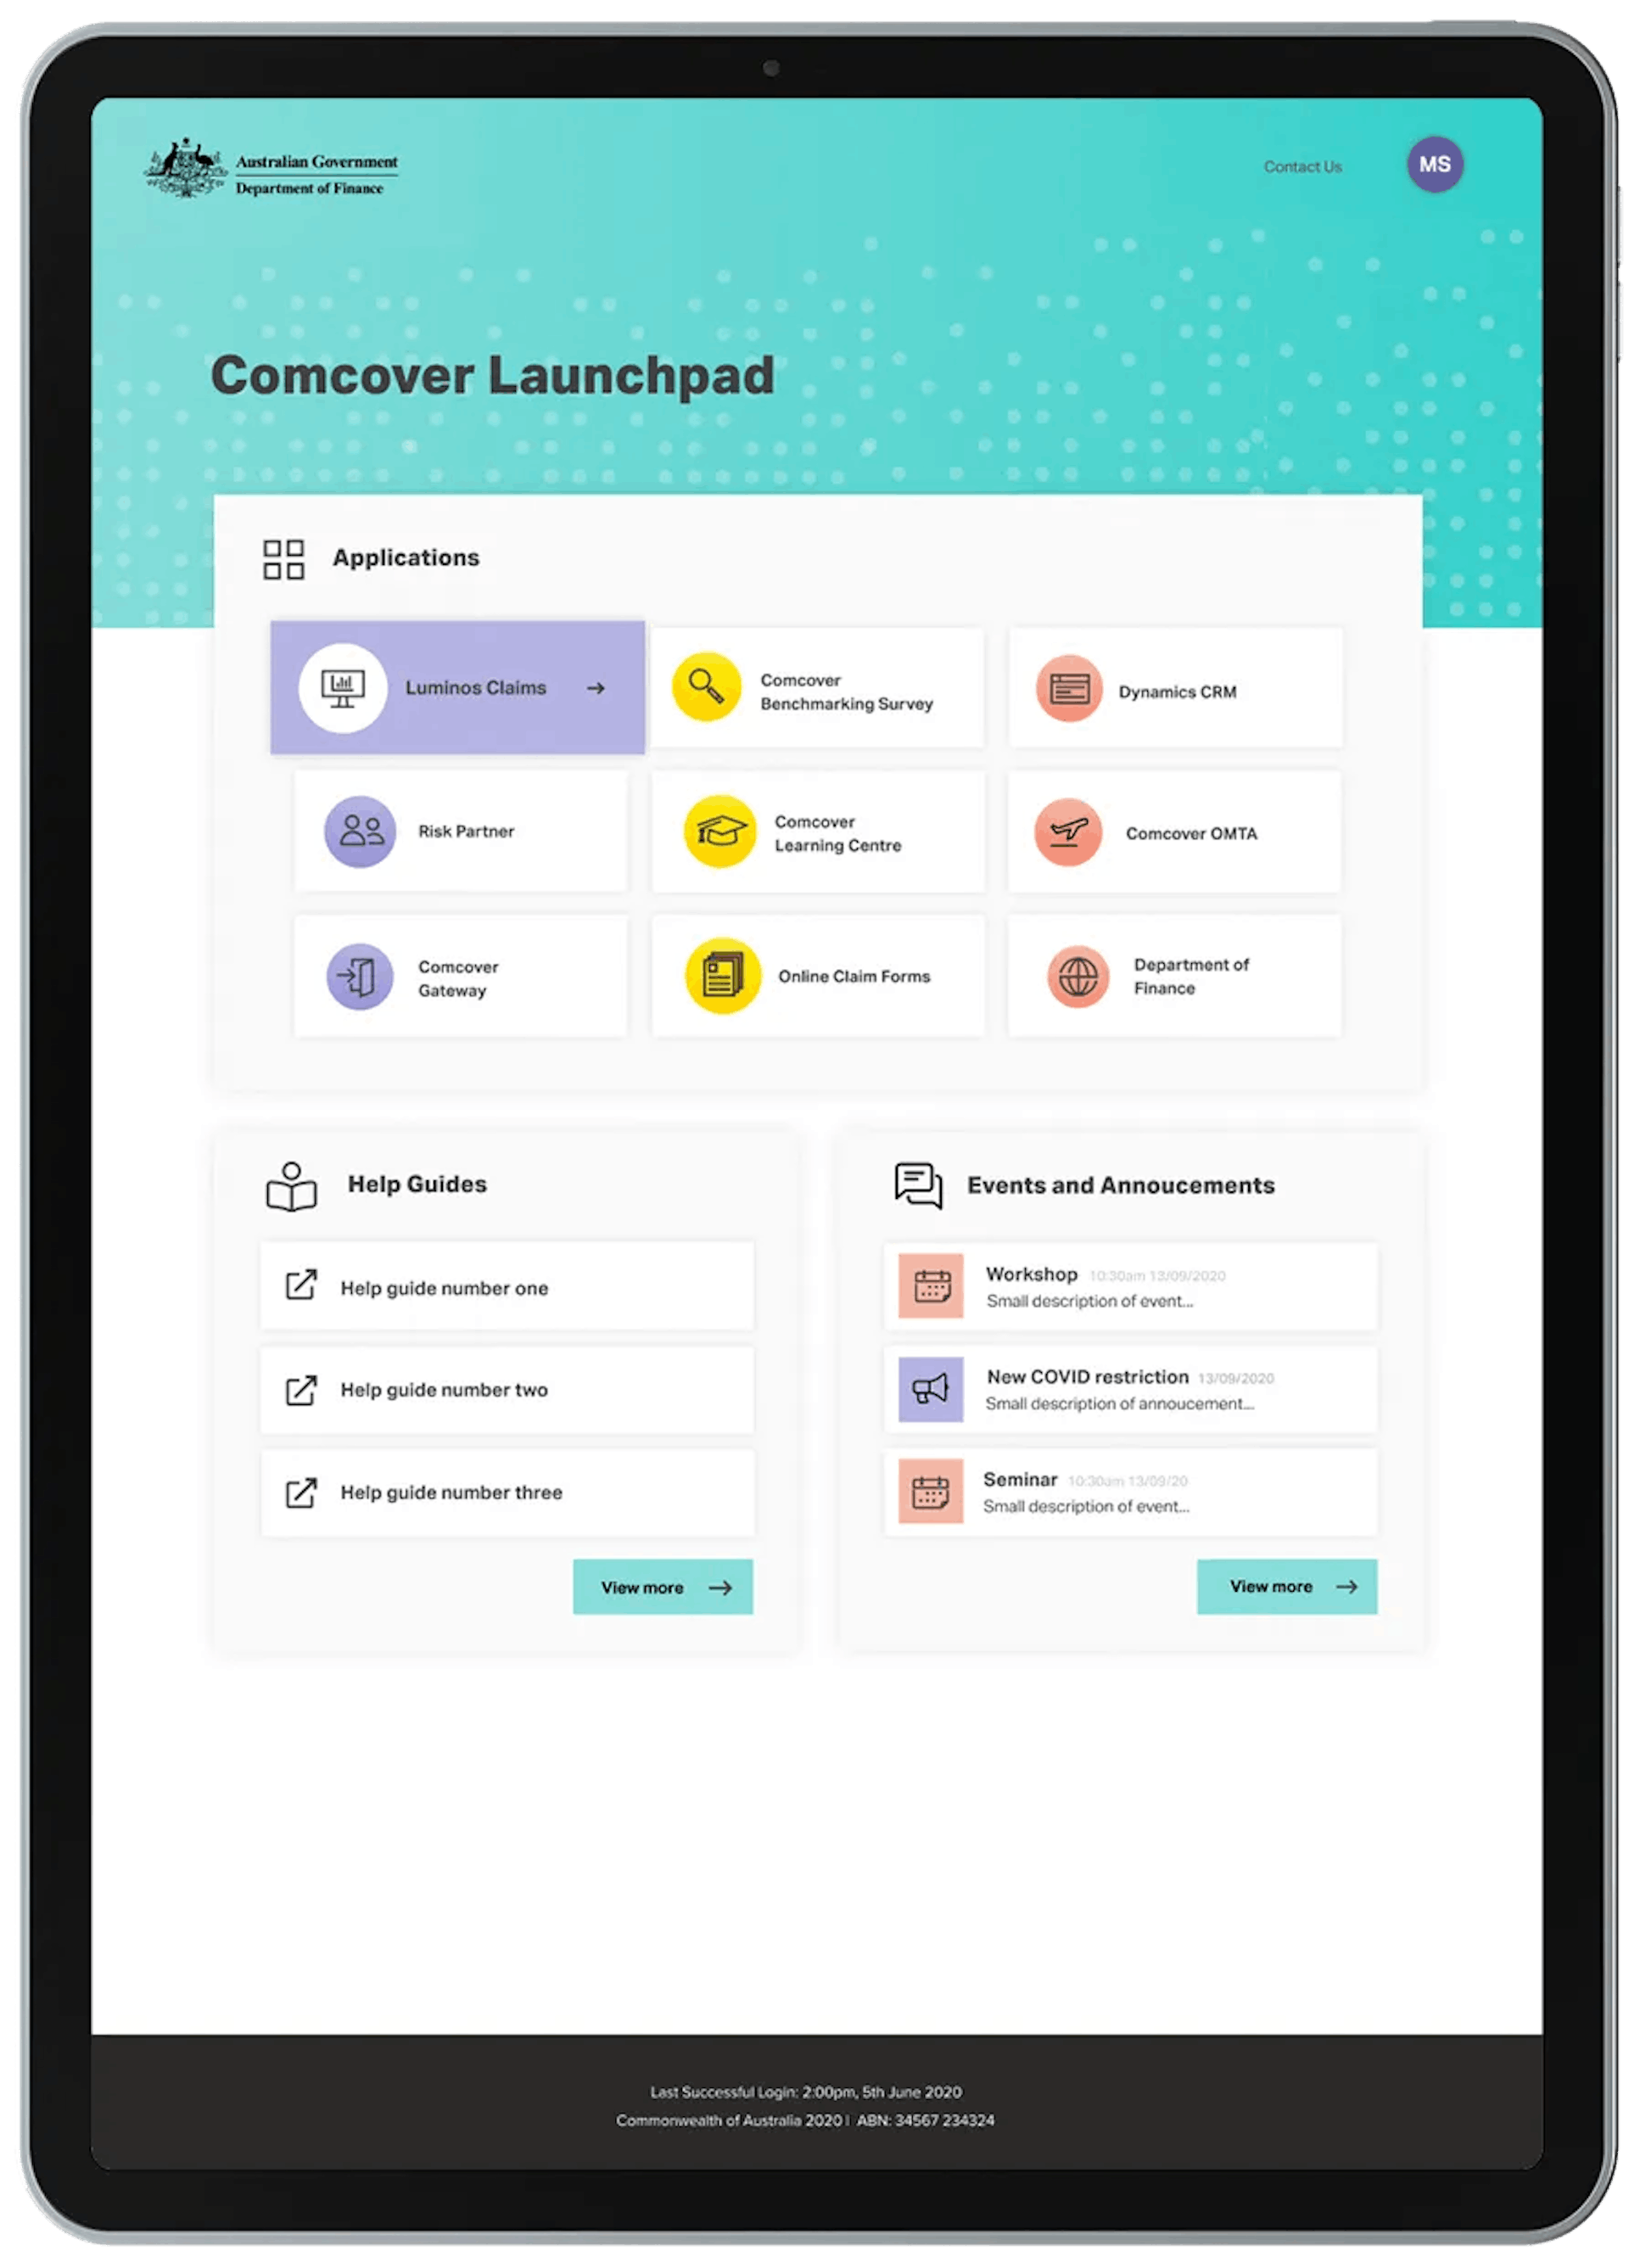 Comcover Launchpad